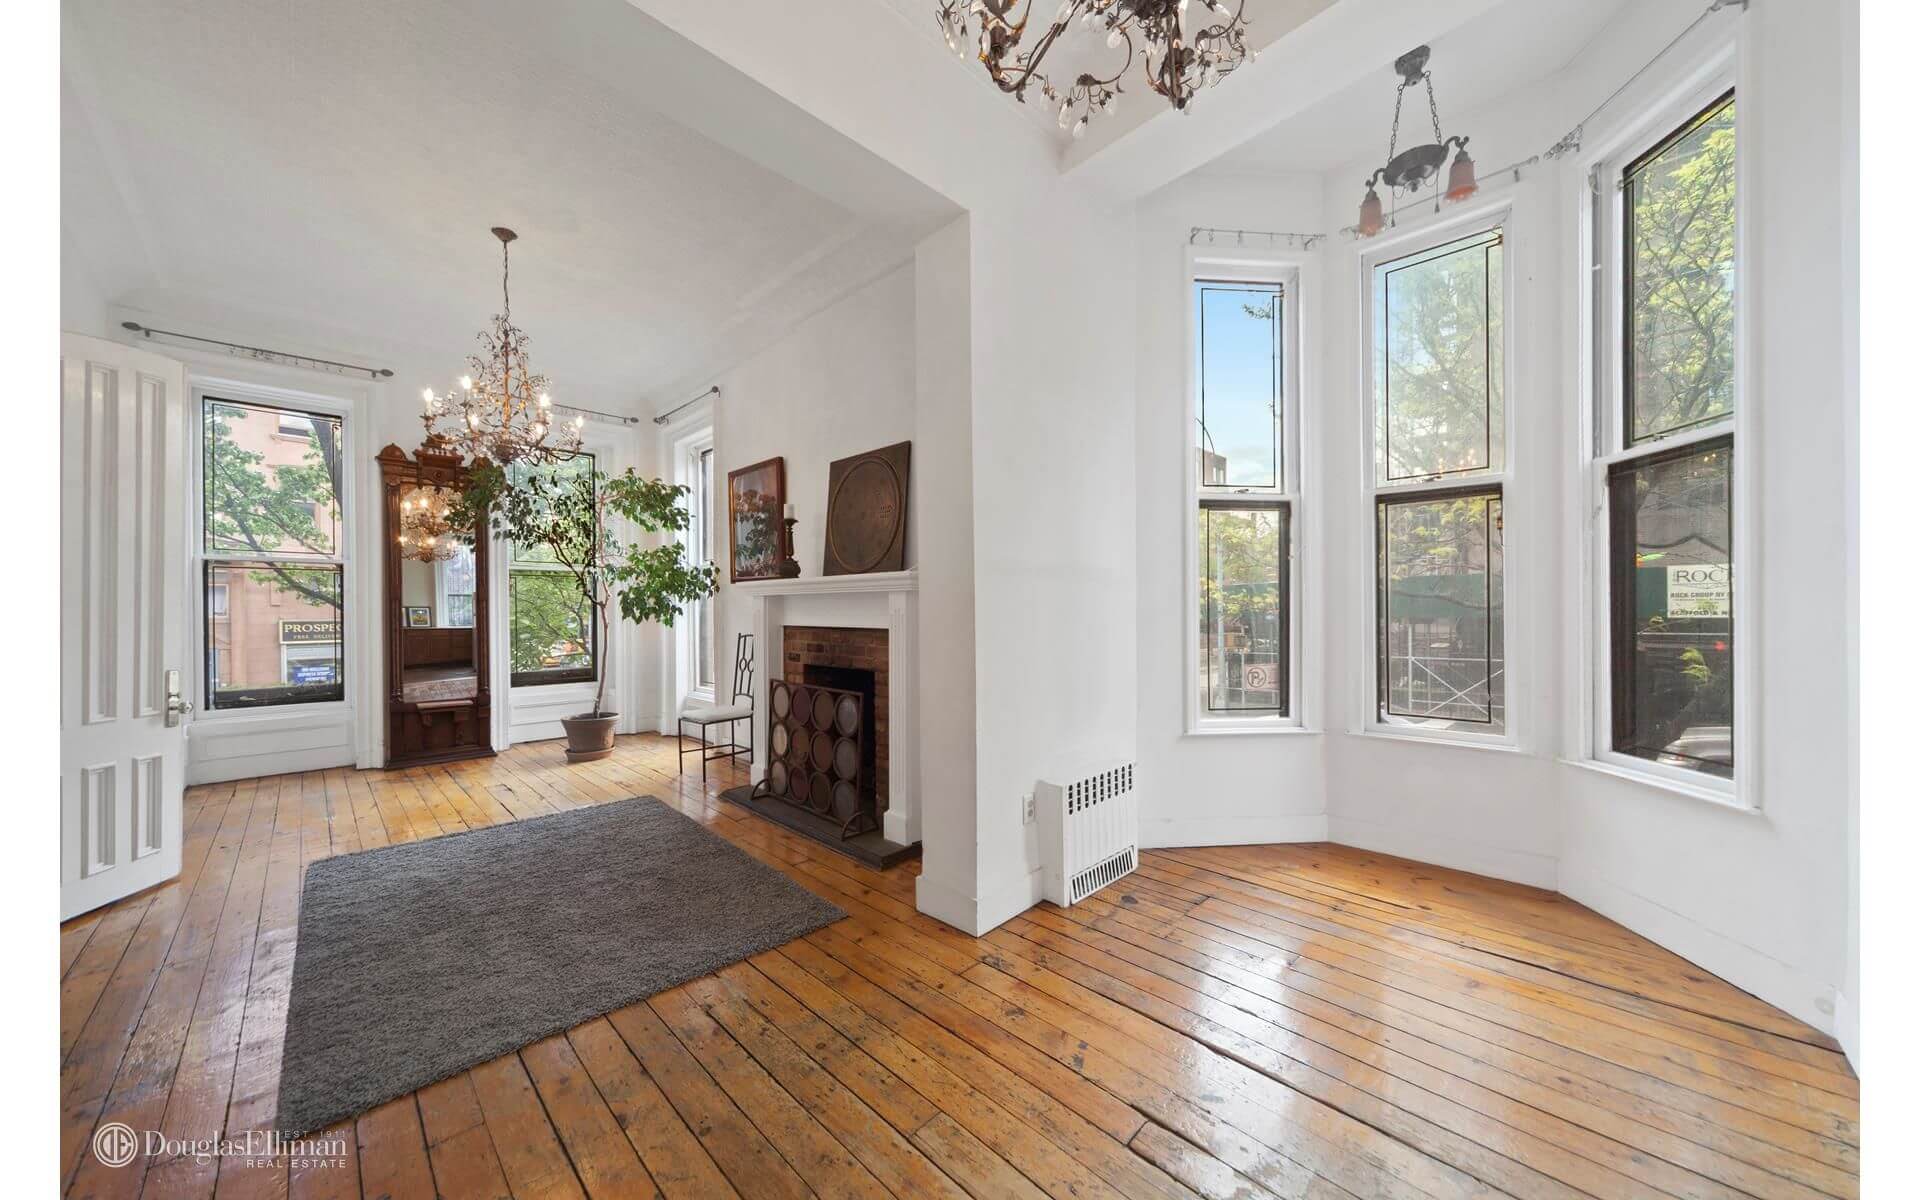 Brooklyn Homes for Sale in Park Slope, Williamsburg, Clinton Hill and Bedford Stuyvesant